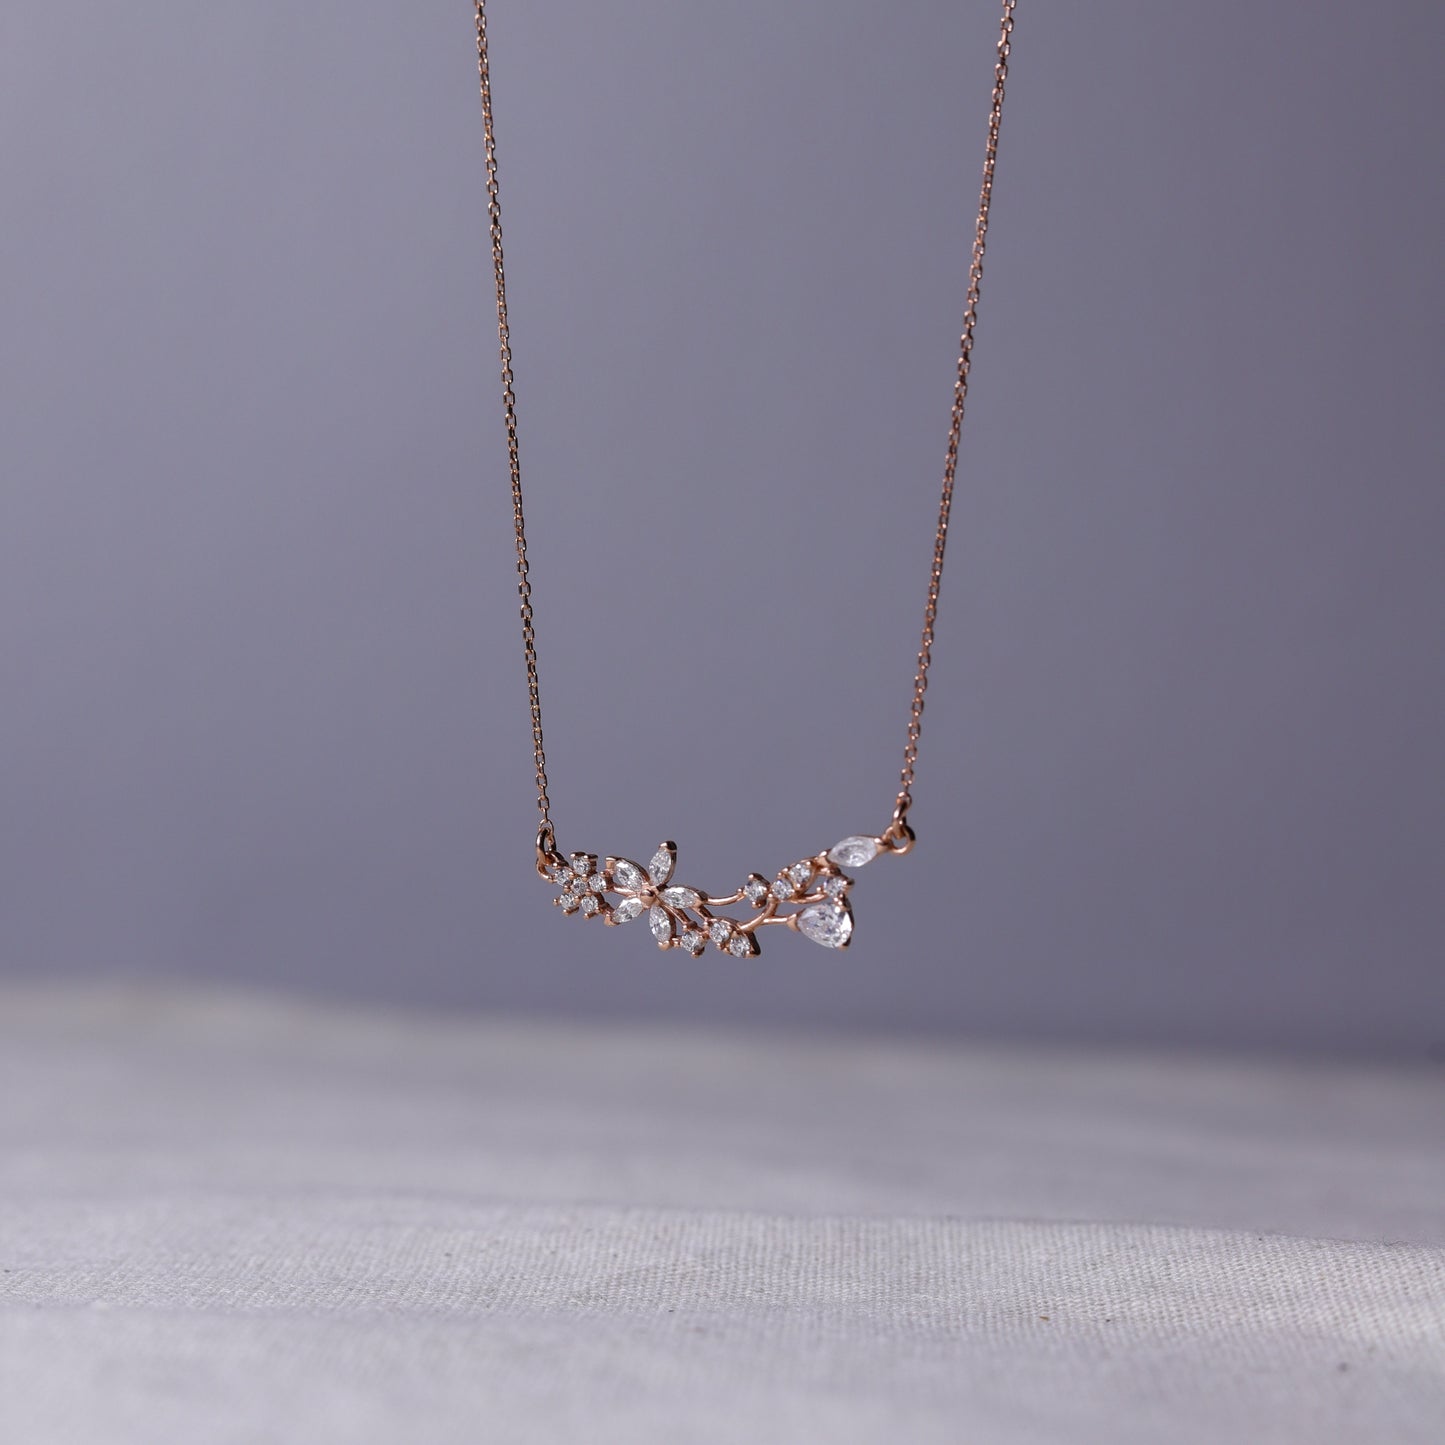 Spring Necklace with 925 Sterling Silver Zircon Stone